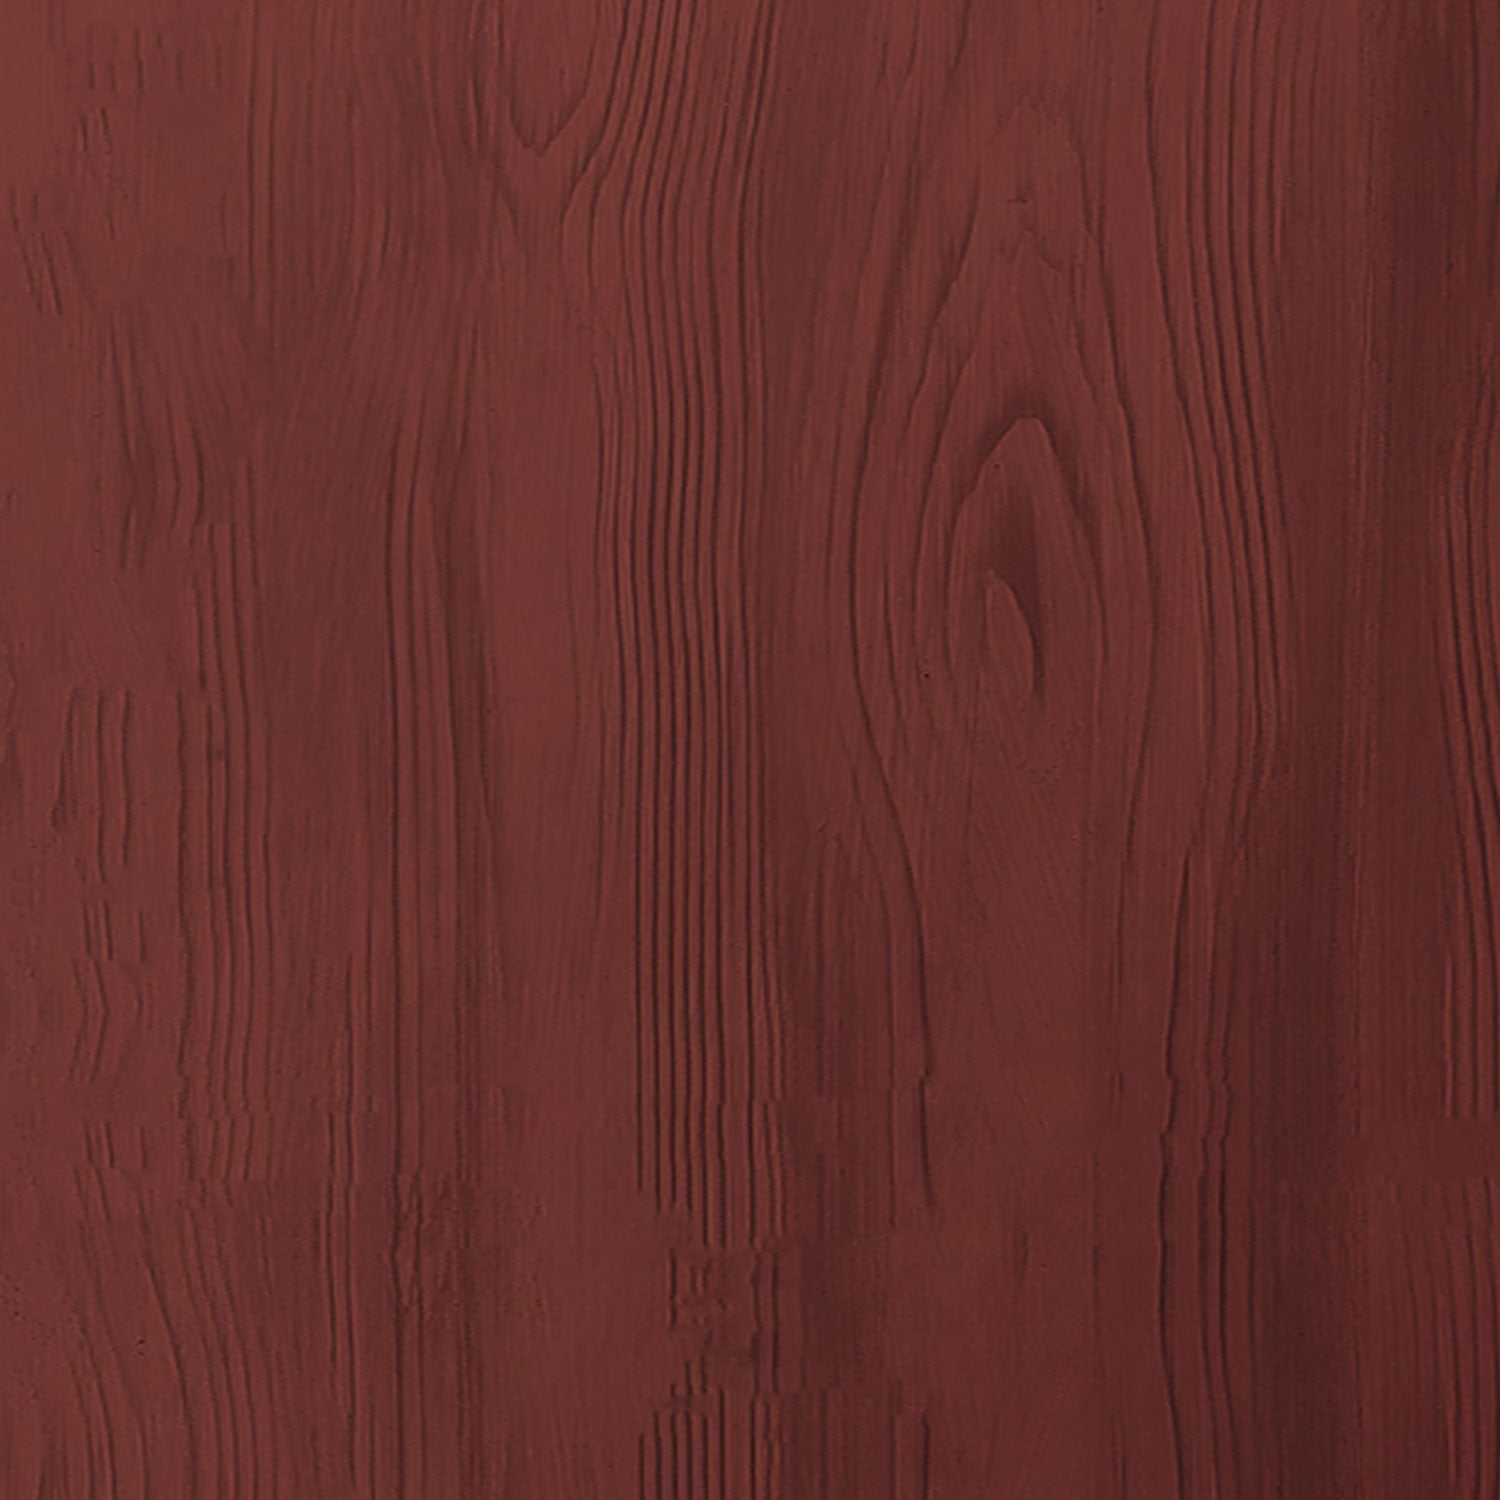 Weathered Finish Kit - Rustic Red